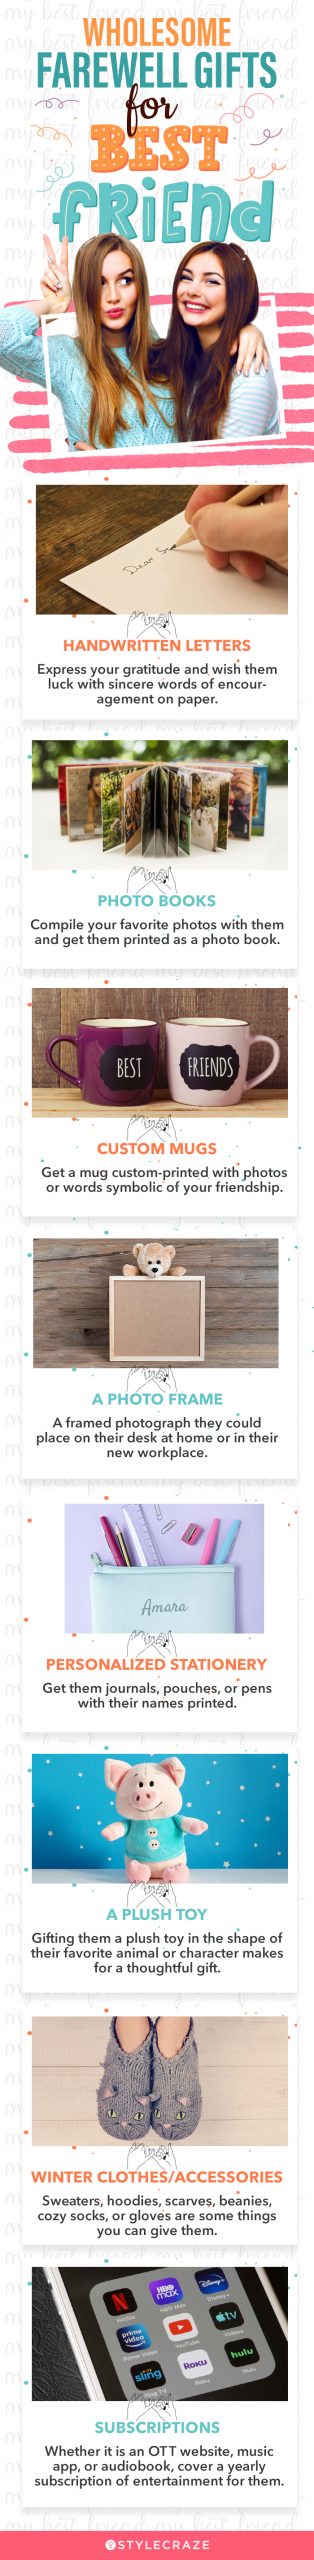 wholesome farewell gifts for best friend [infographic]